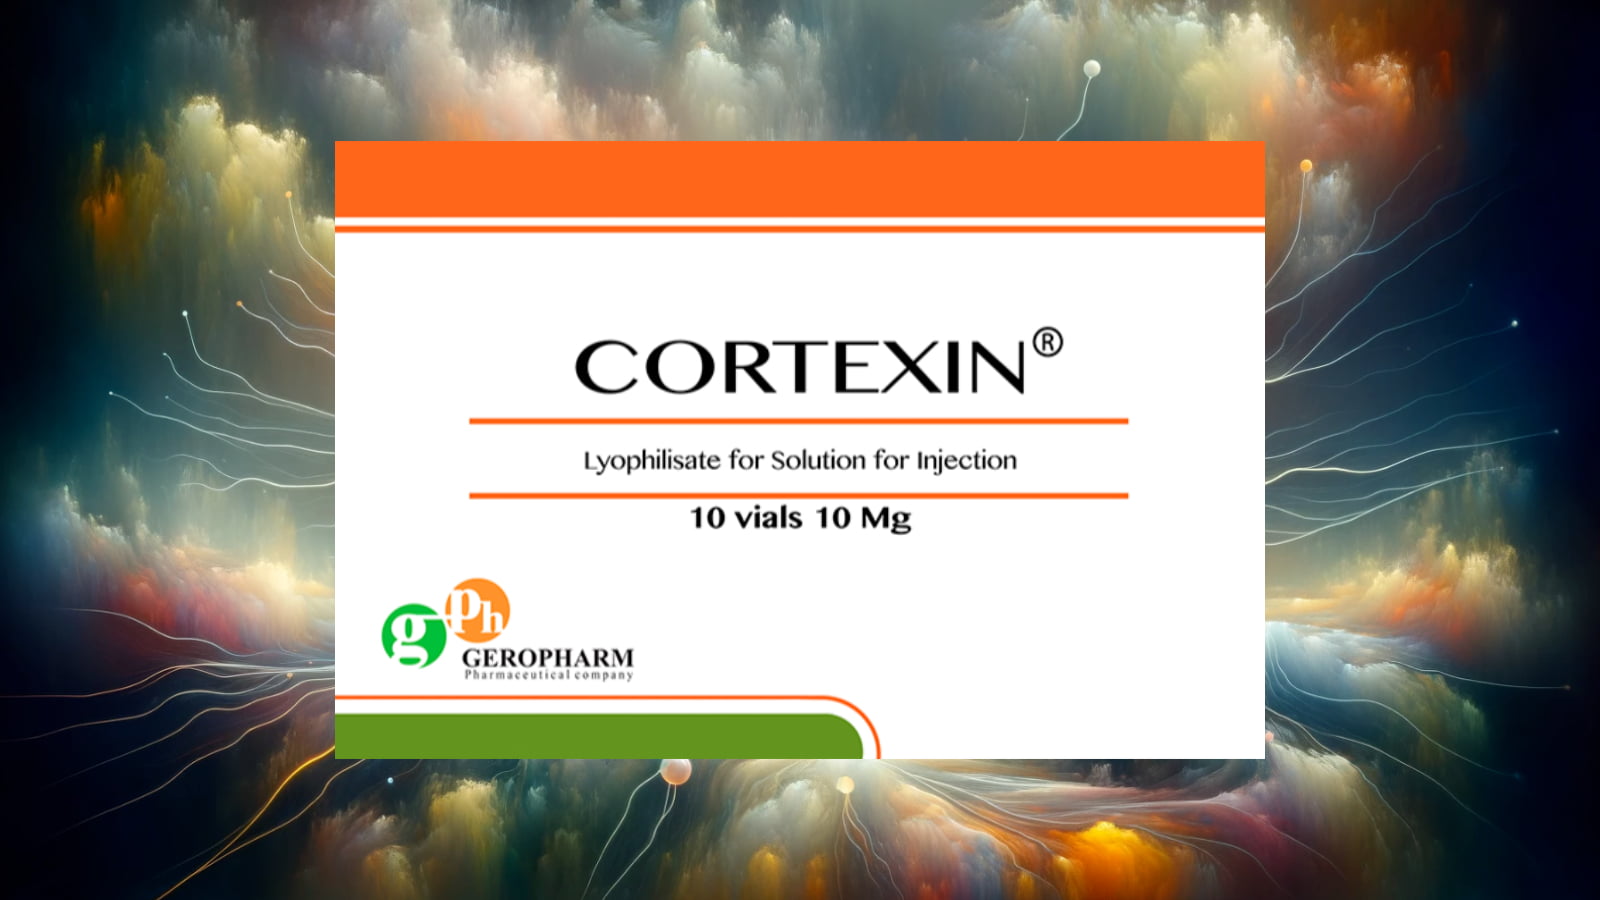 Article discussing the cognitive enhancement and brain health benefits of the nootropic Cortexin.